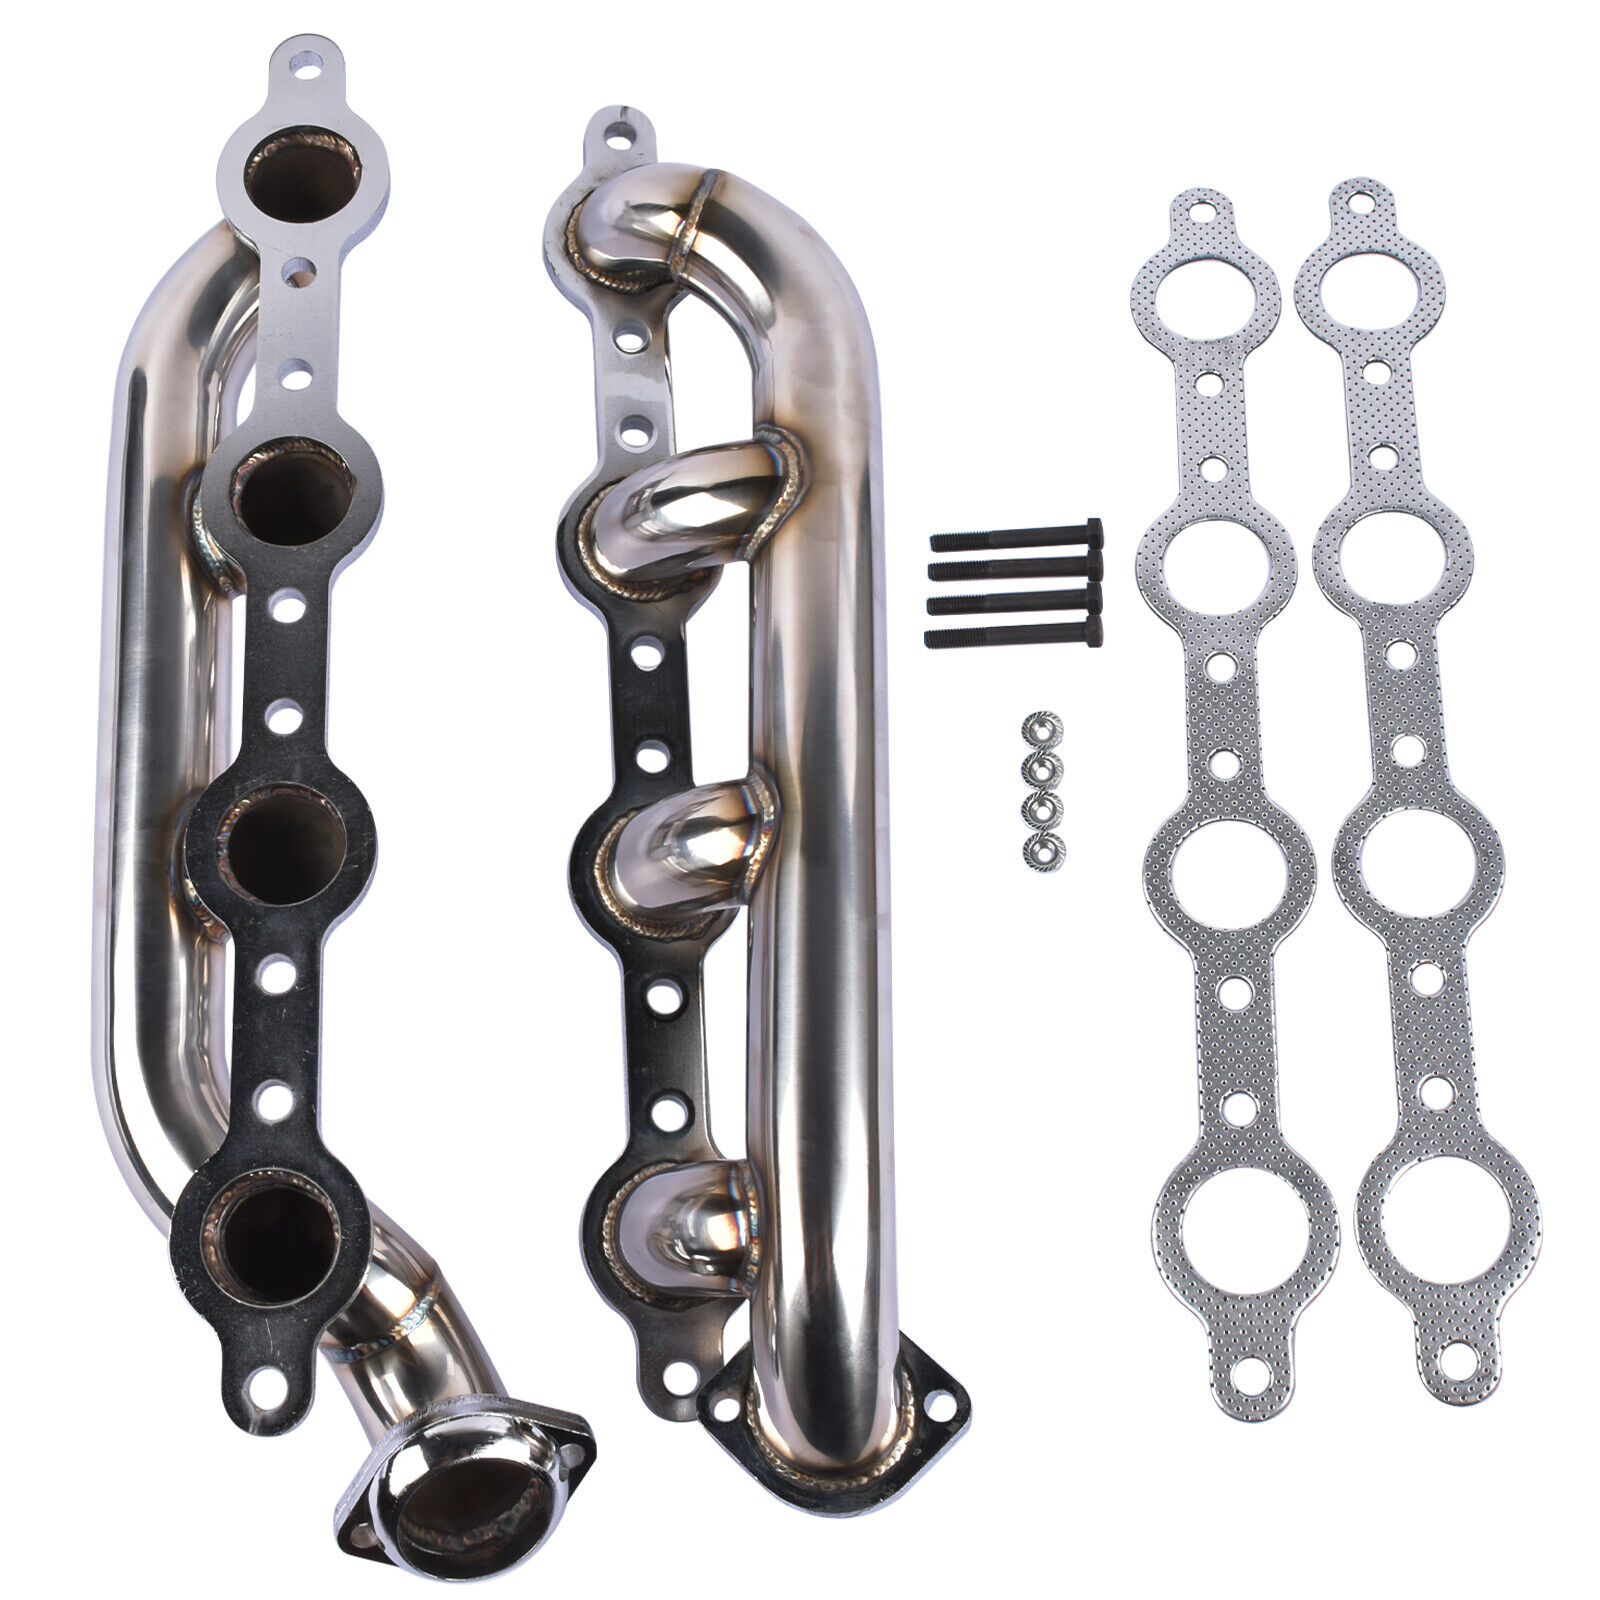 NEW Stainless Performance Headers Manifolds for Ford F450 F350 F250 7.3L